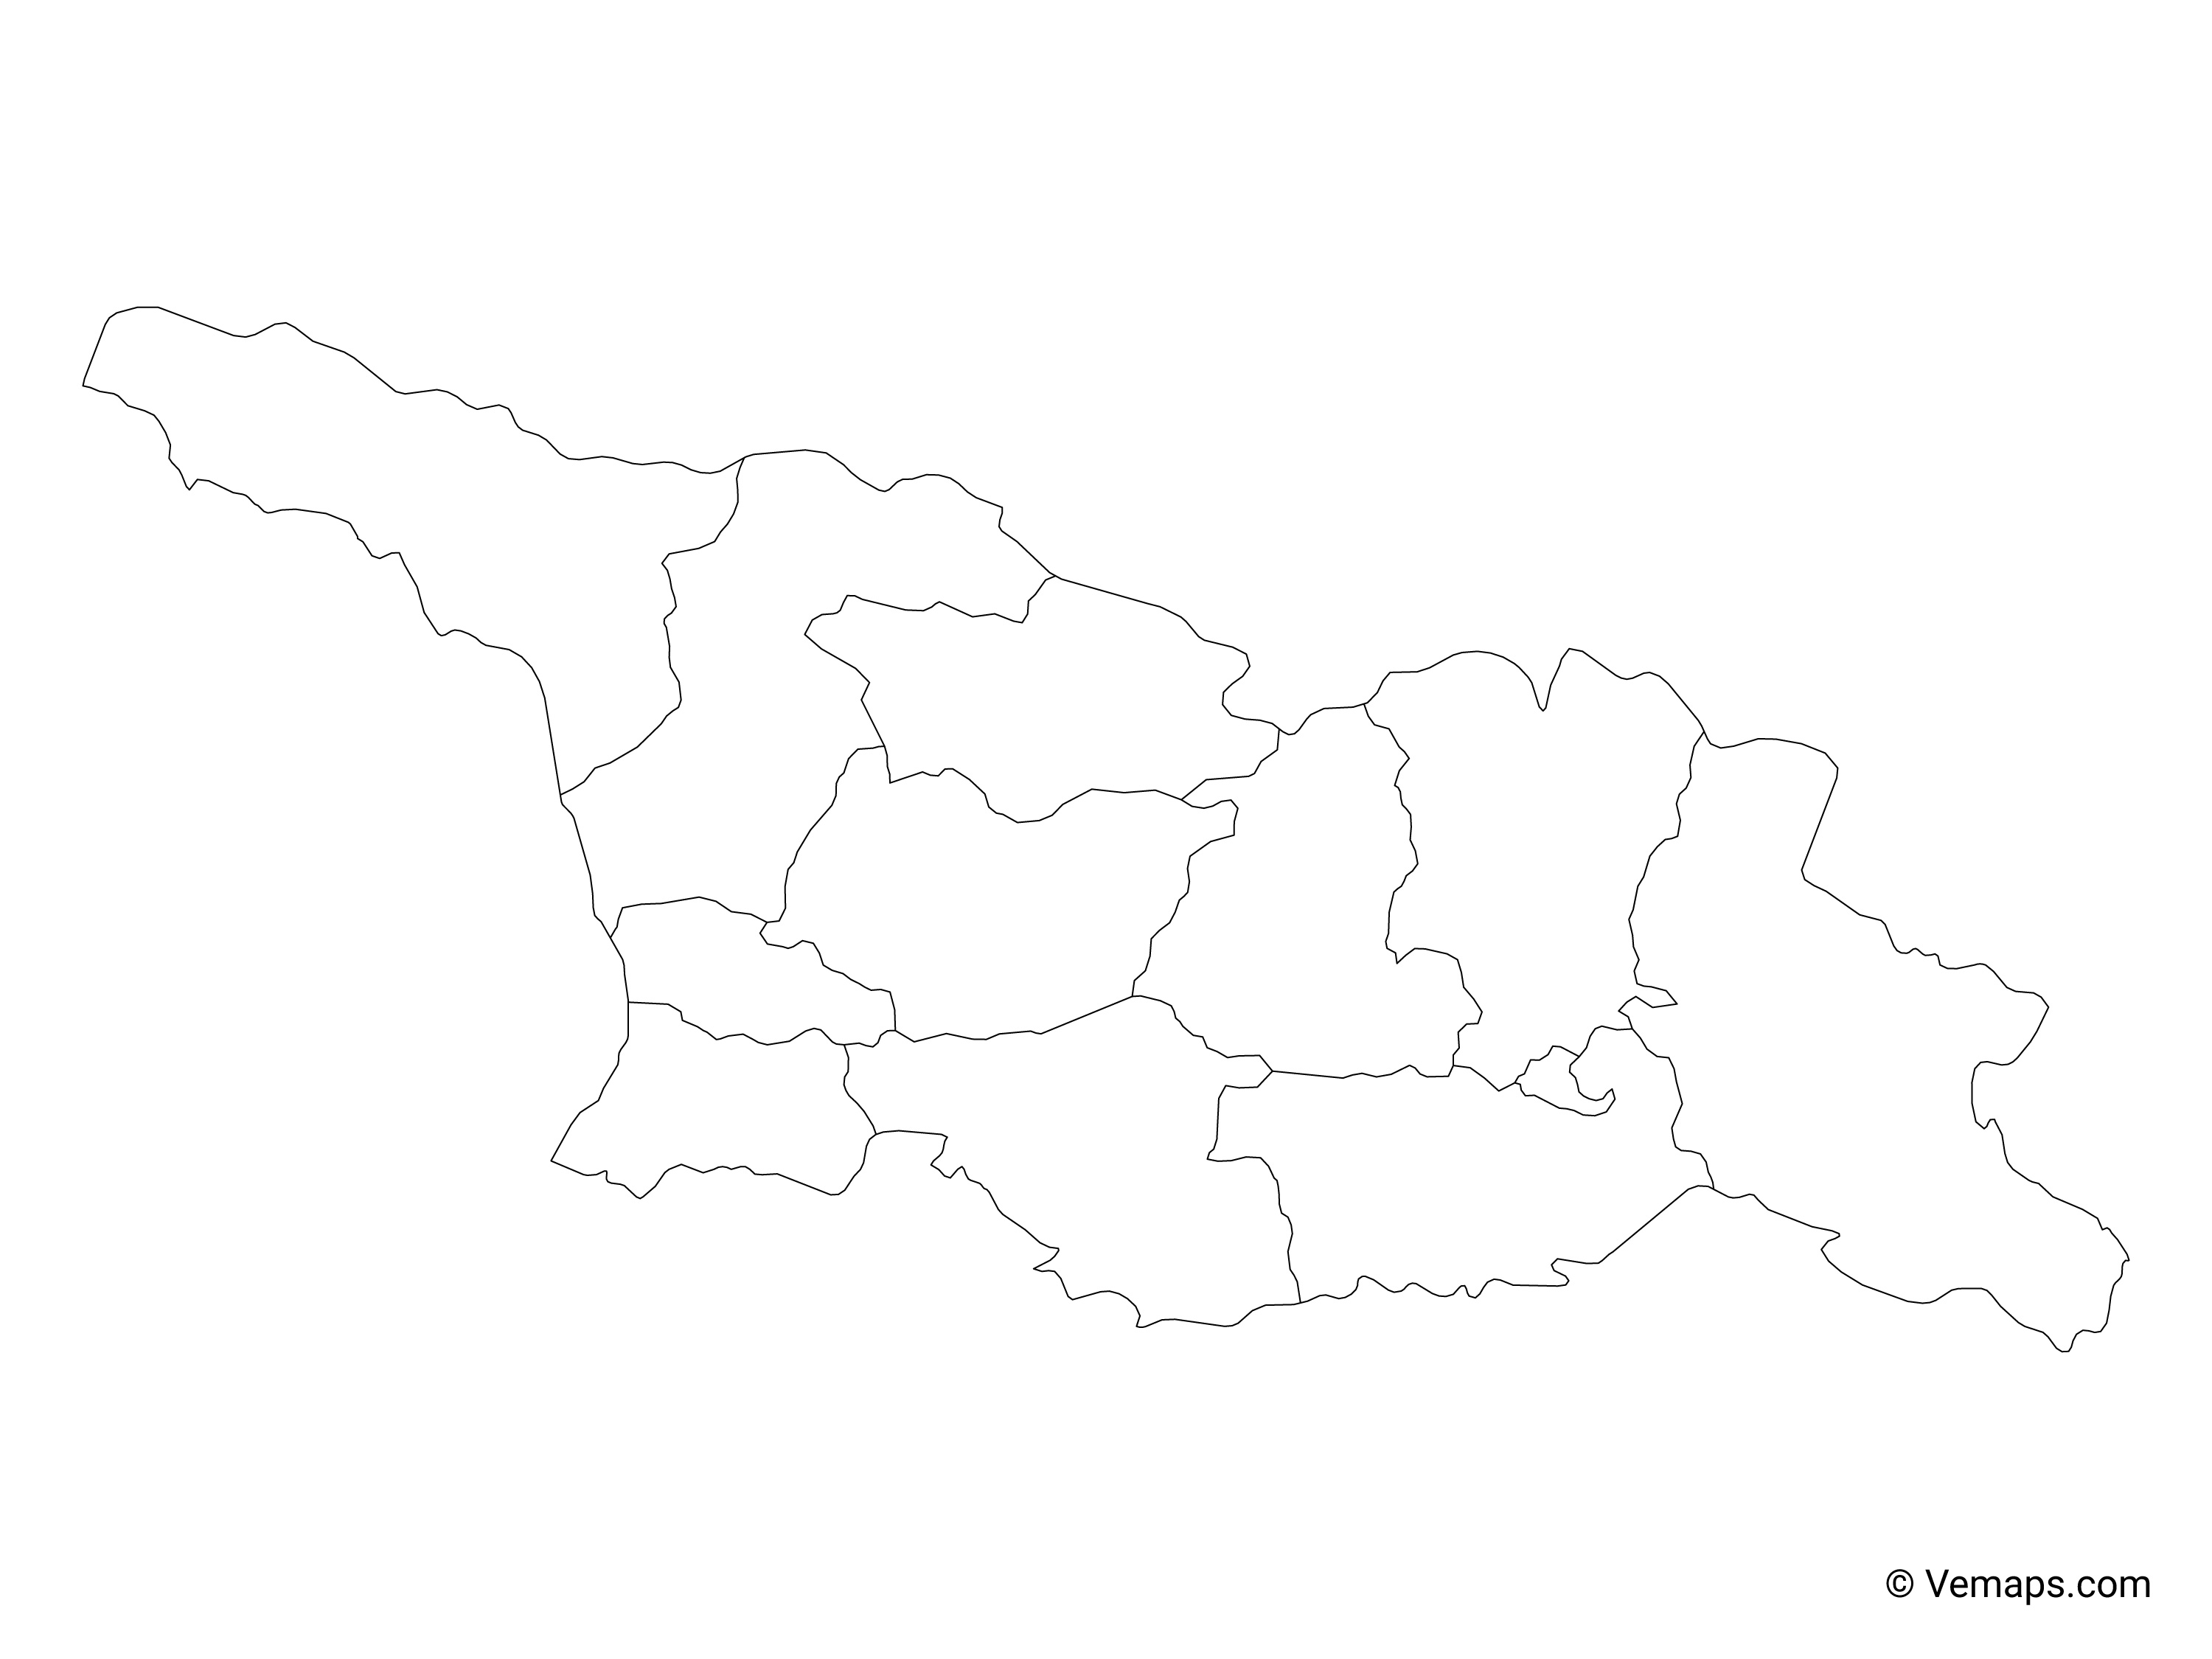 Outline map of georgia with regions free vector maps